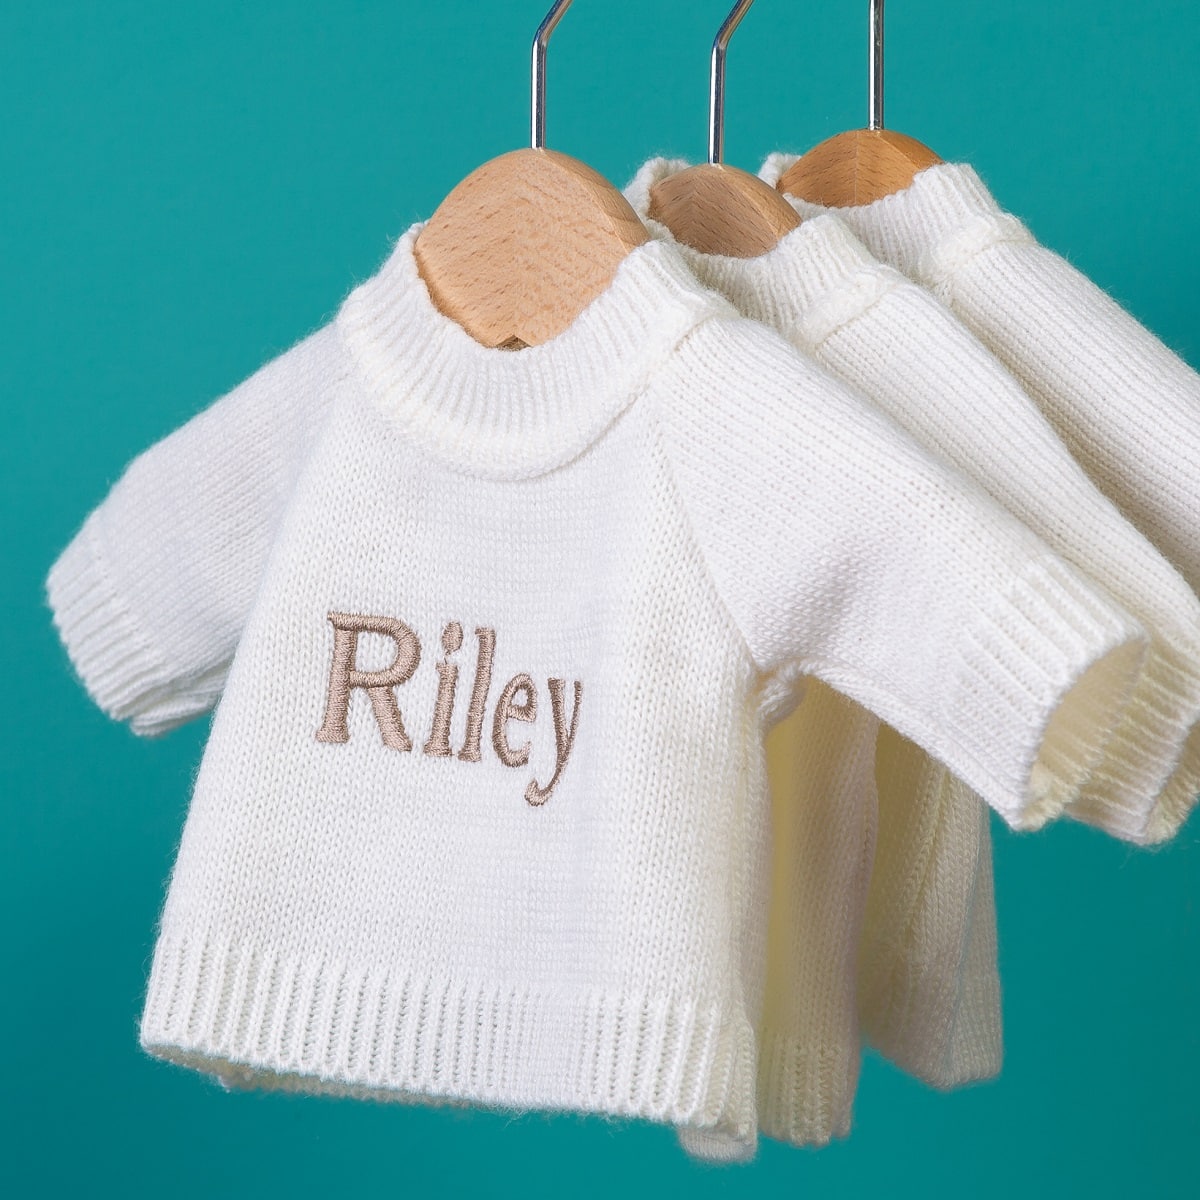 riley personalised white plush jumpers